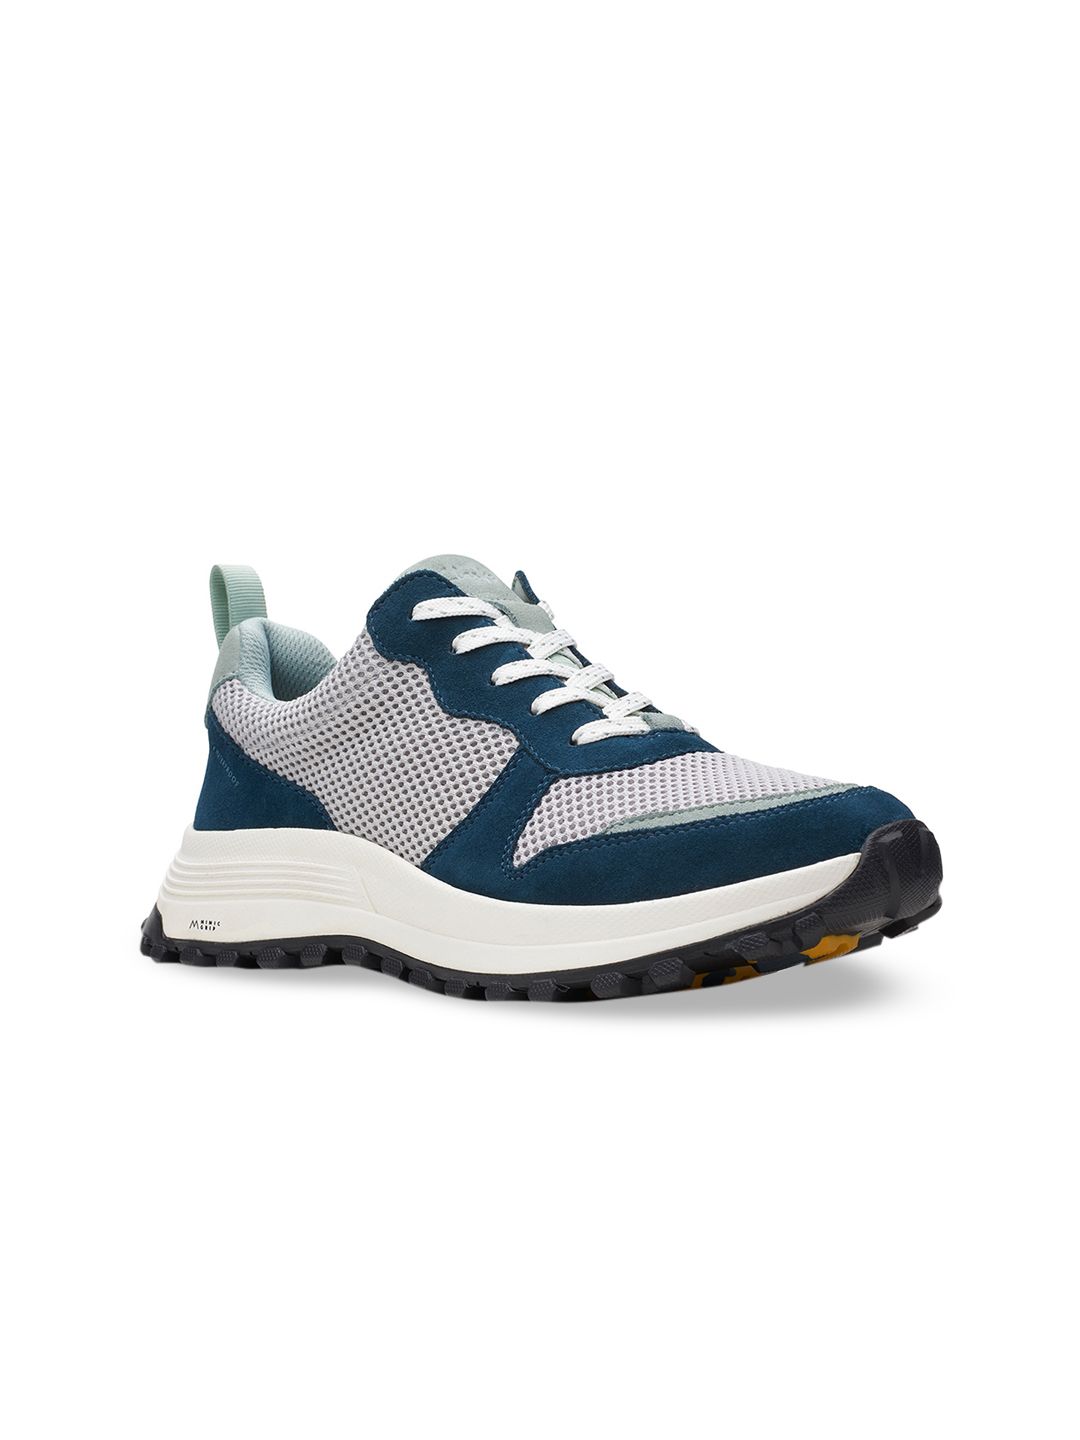 Clarks Women Teal Colourblocked Sneakers Price in India